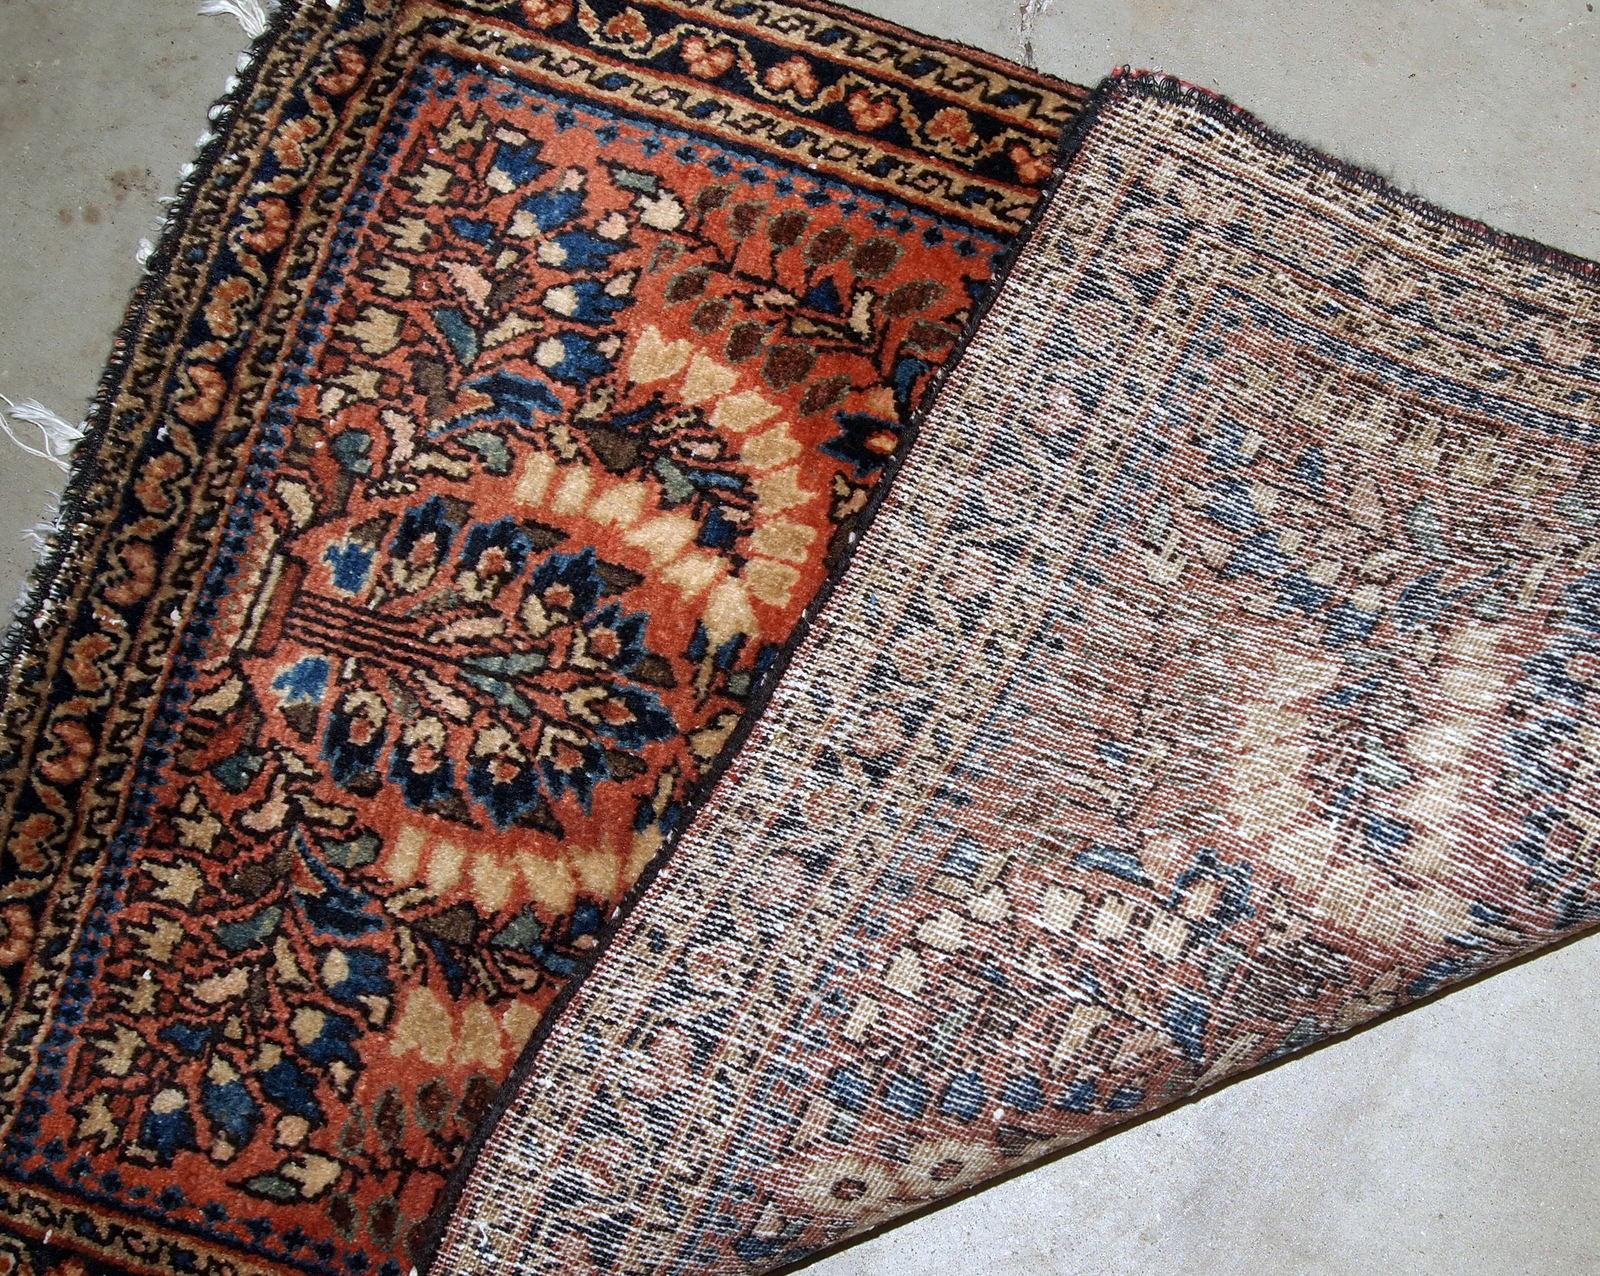 Handmade antique Sarouk style rug in original good condition. The rug is from the beginning of 20th century made in traditional design.

?-Condition: Original good,

-circa 1920s,

-Size: 2.1' x 3.2' (64cm x 97cm),

-Material: